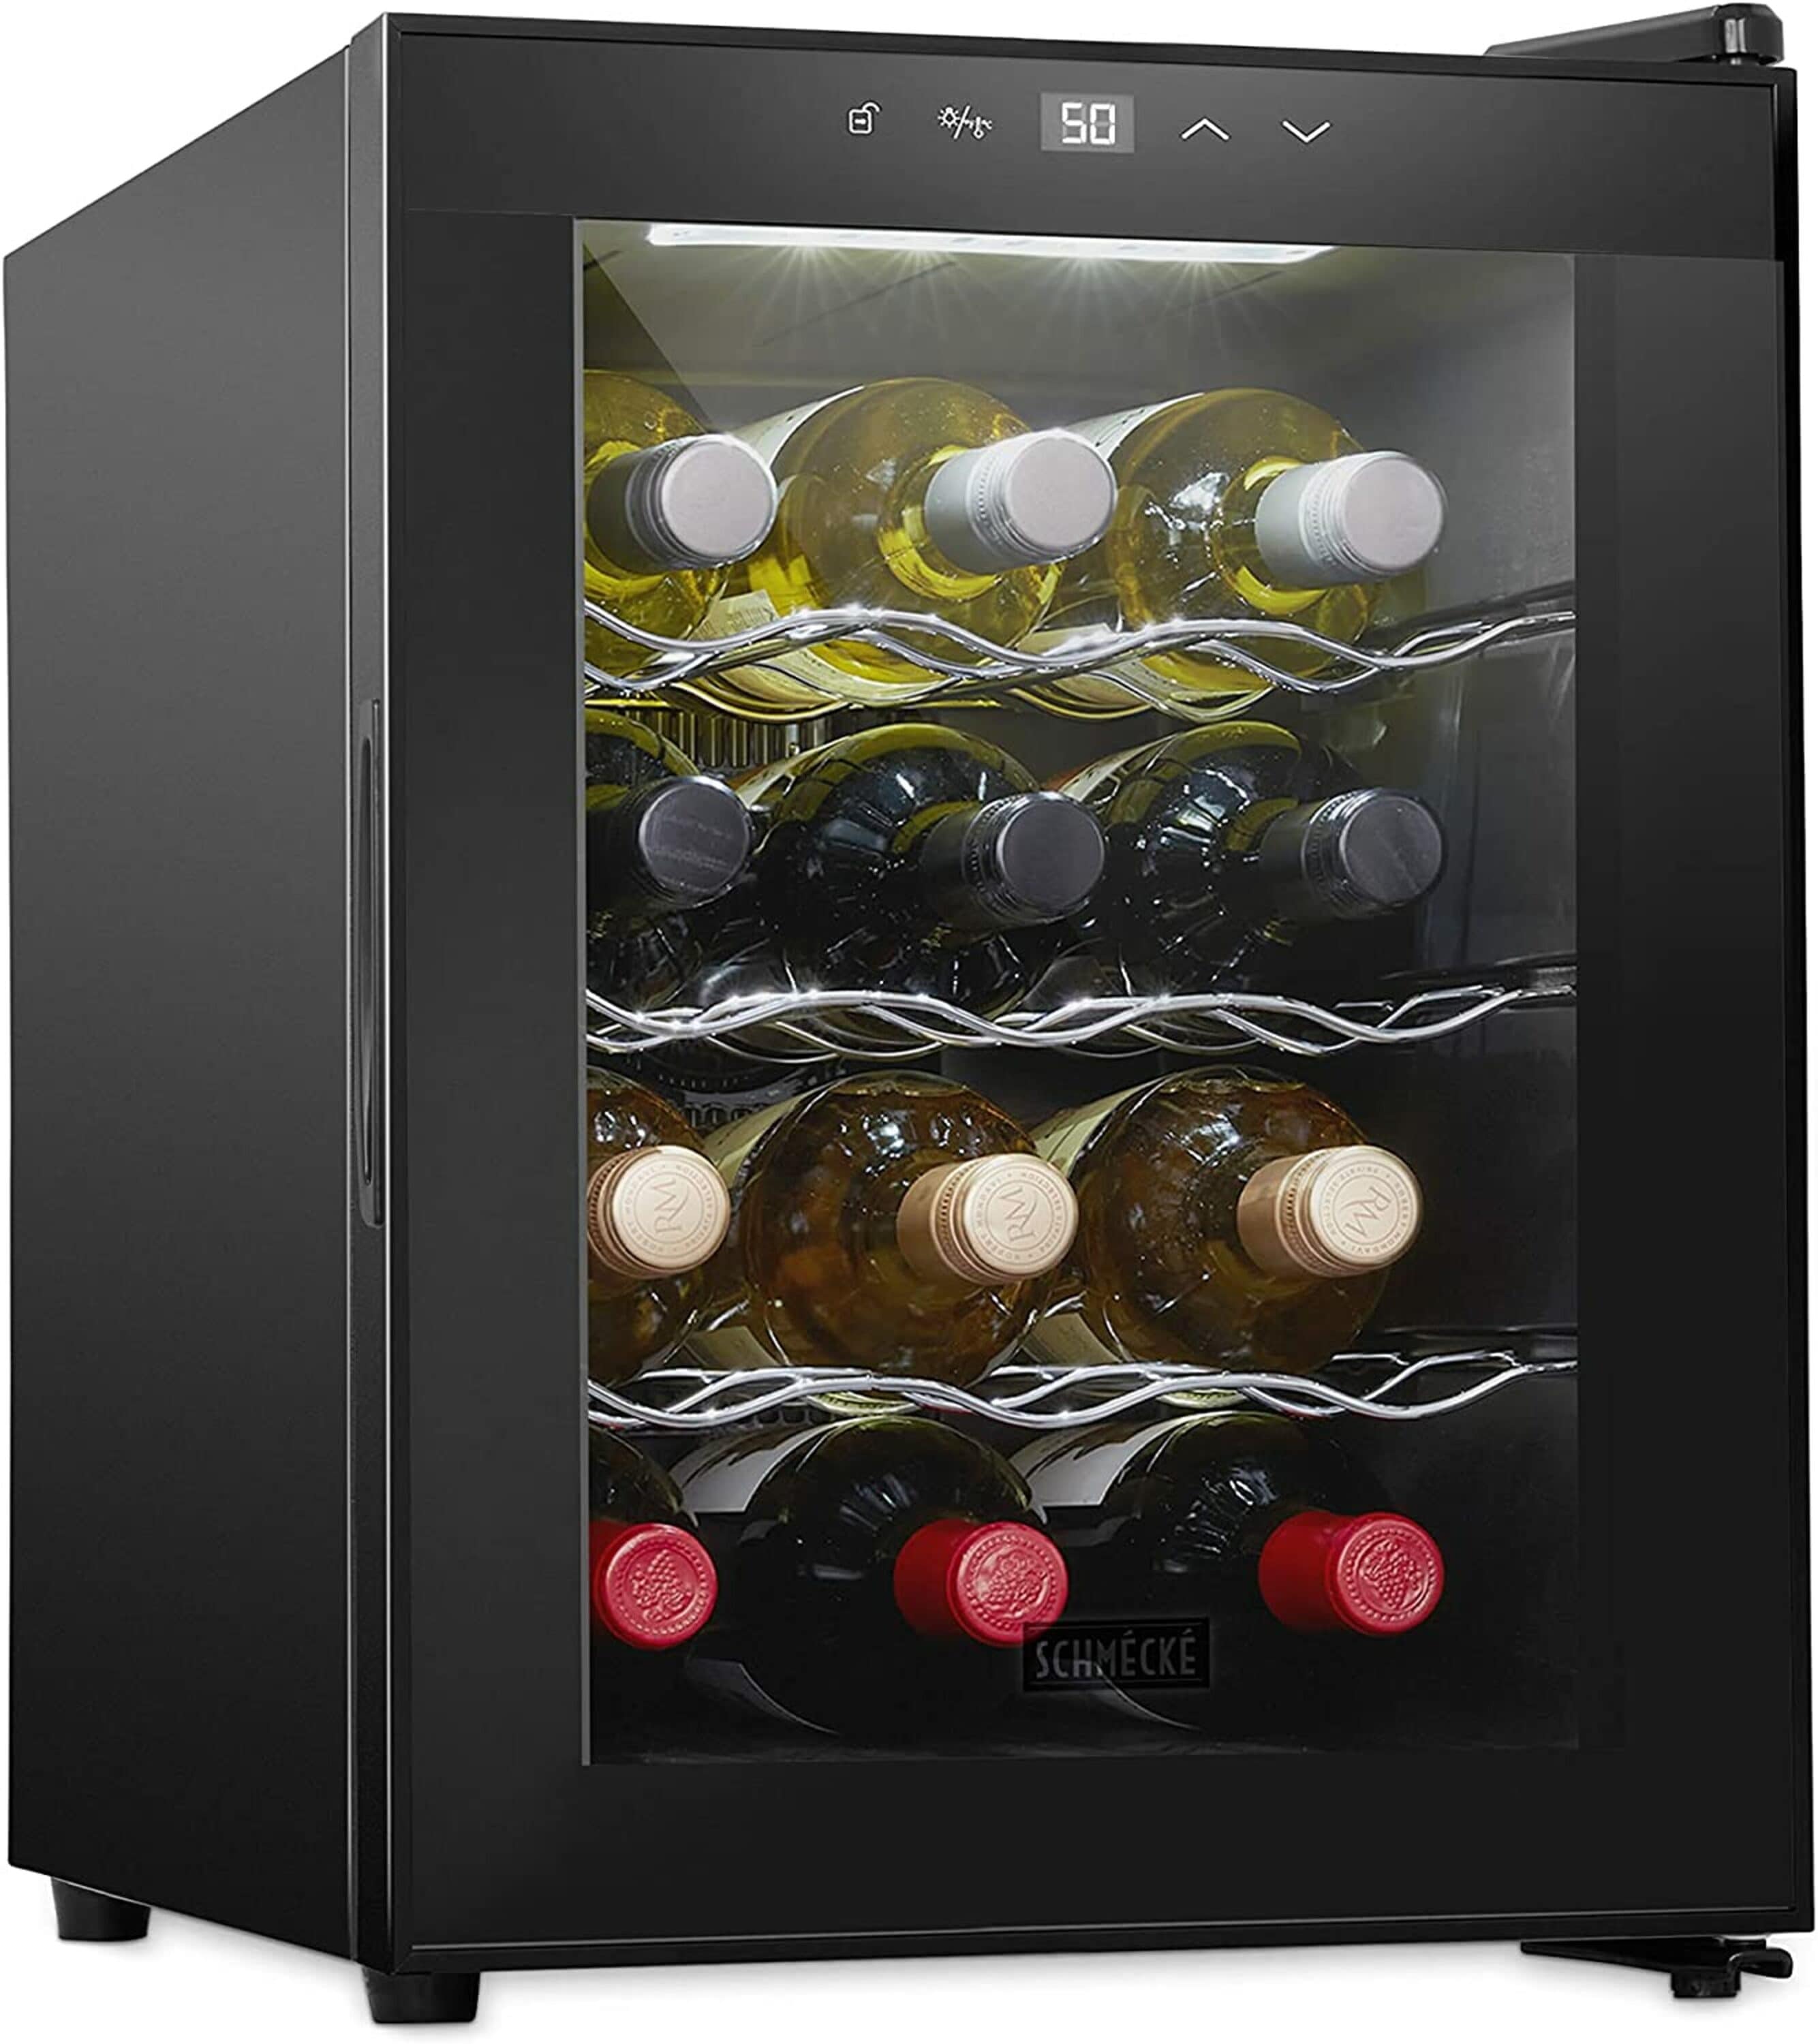 BLACK+DECKER Thermoelectric Wine Cooler Refrigerator Review 